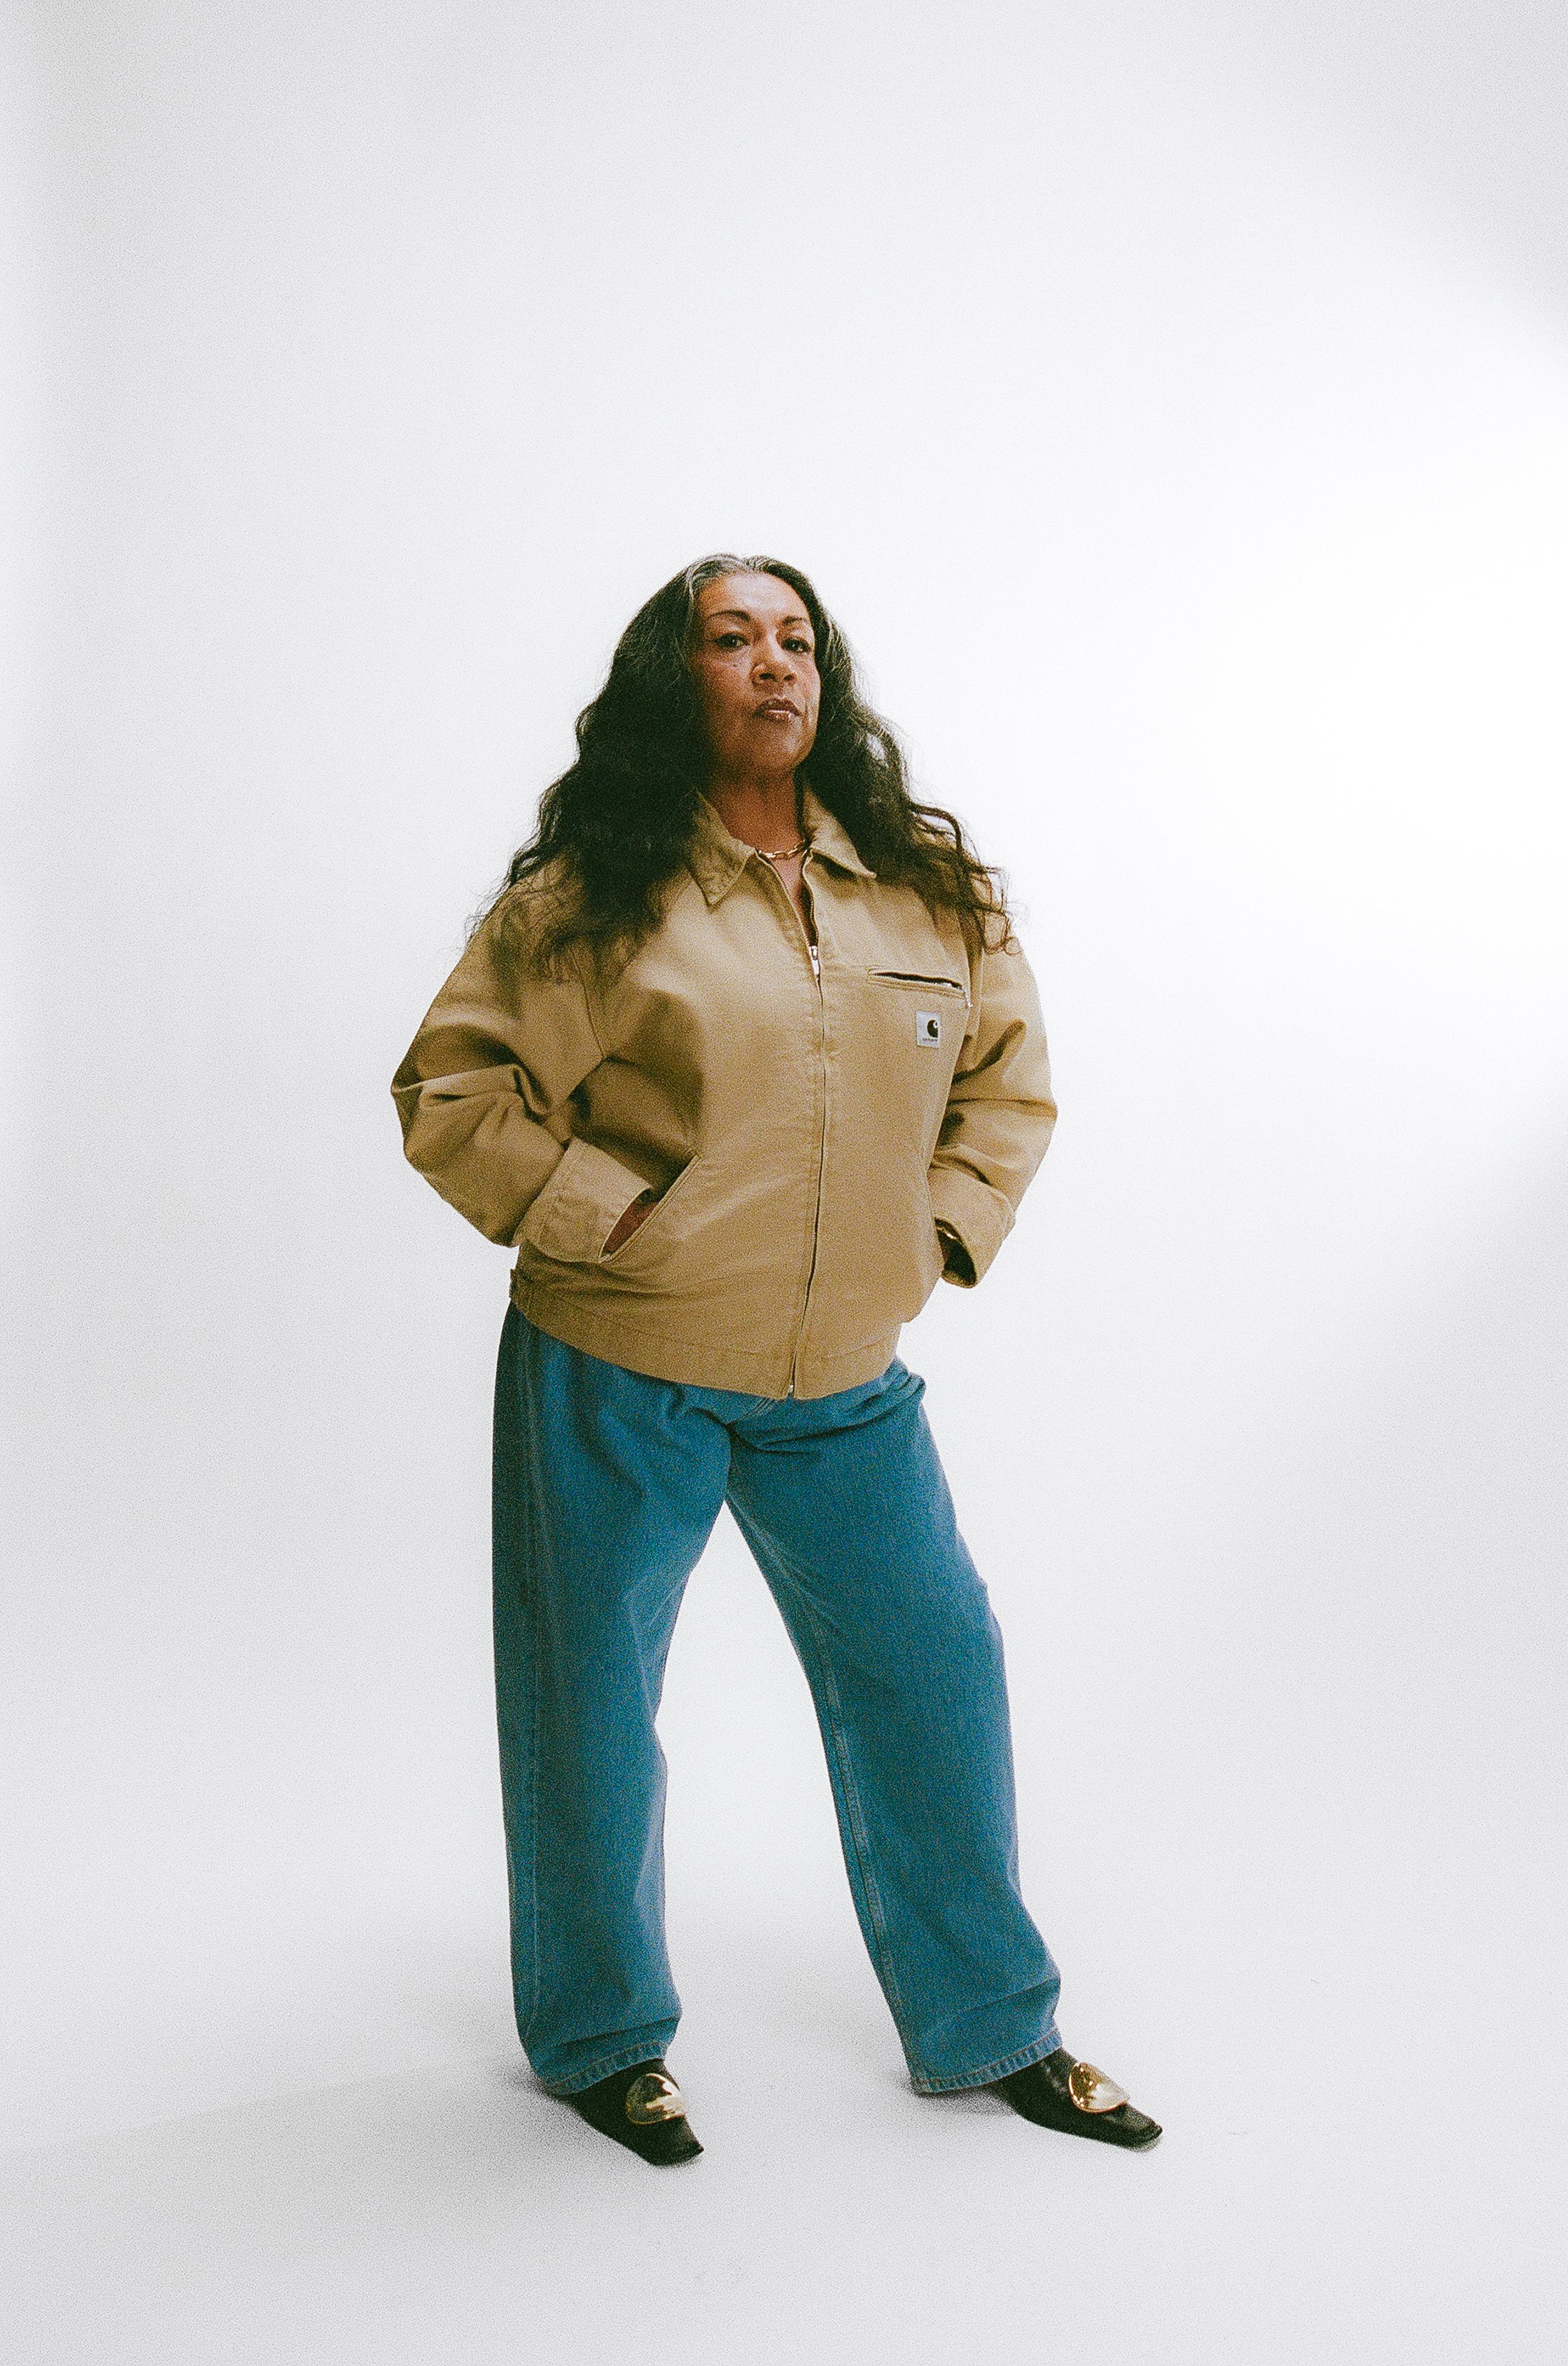 Jessica - L1 - Carhartt WIP Submission R1 Final Selects3.jpeg